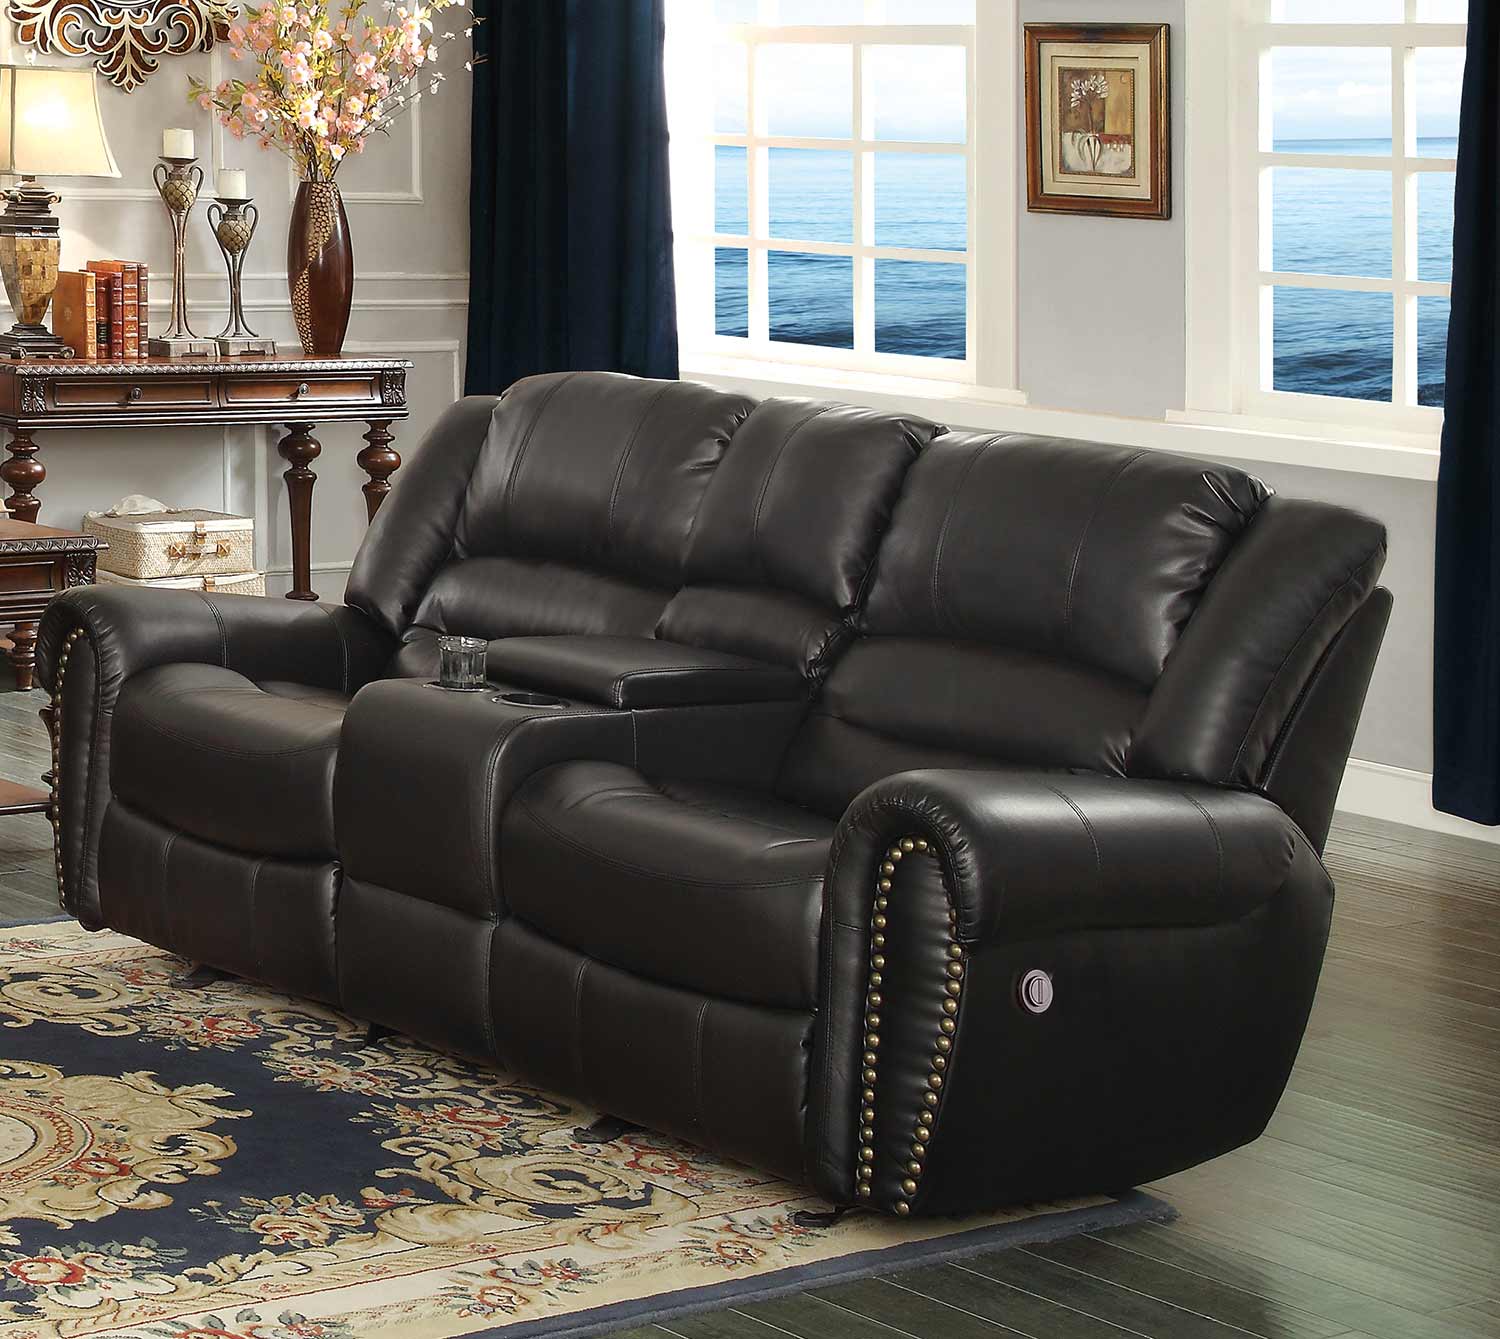 Homelegance Center Hill Power Double Reclining Love Seat with Center Console - Black